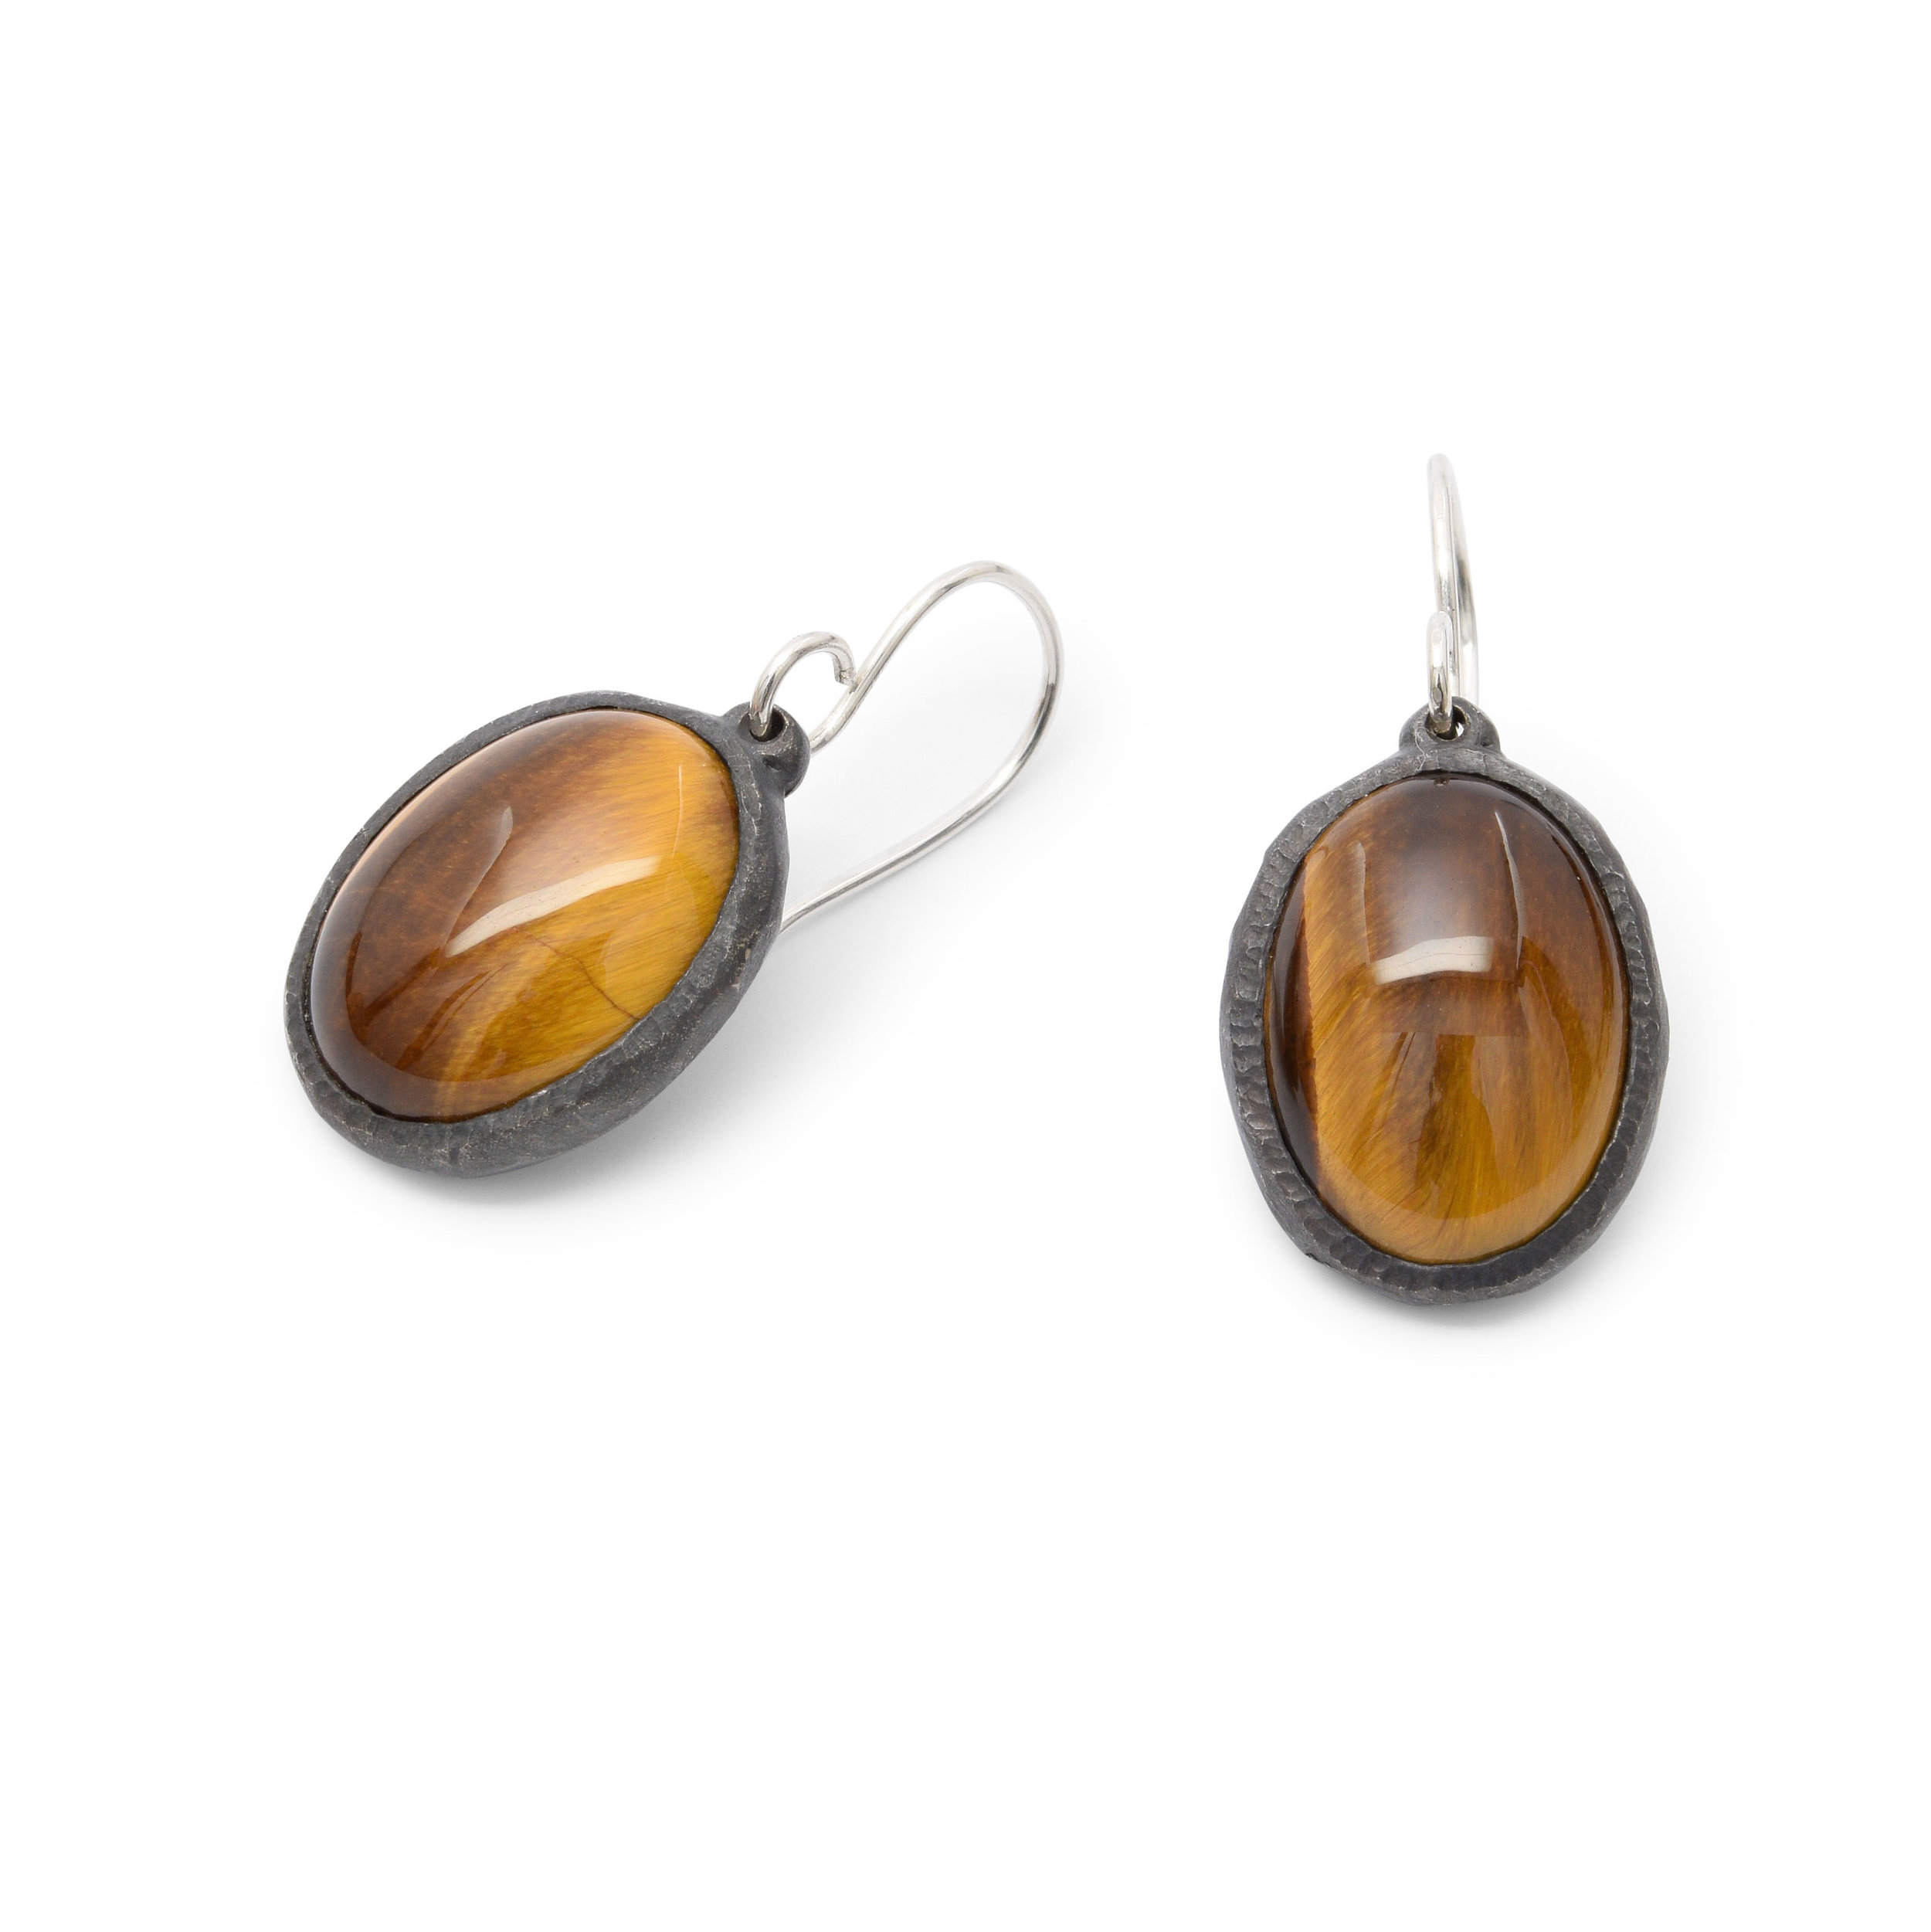 Details about   70% Off 925 Pure Silver TIGER'S EYE Triangle Earrings And Pendant 10.1 Grams 